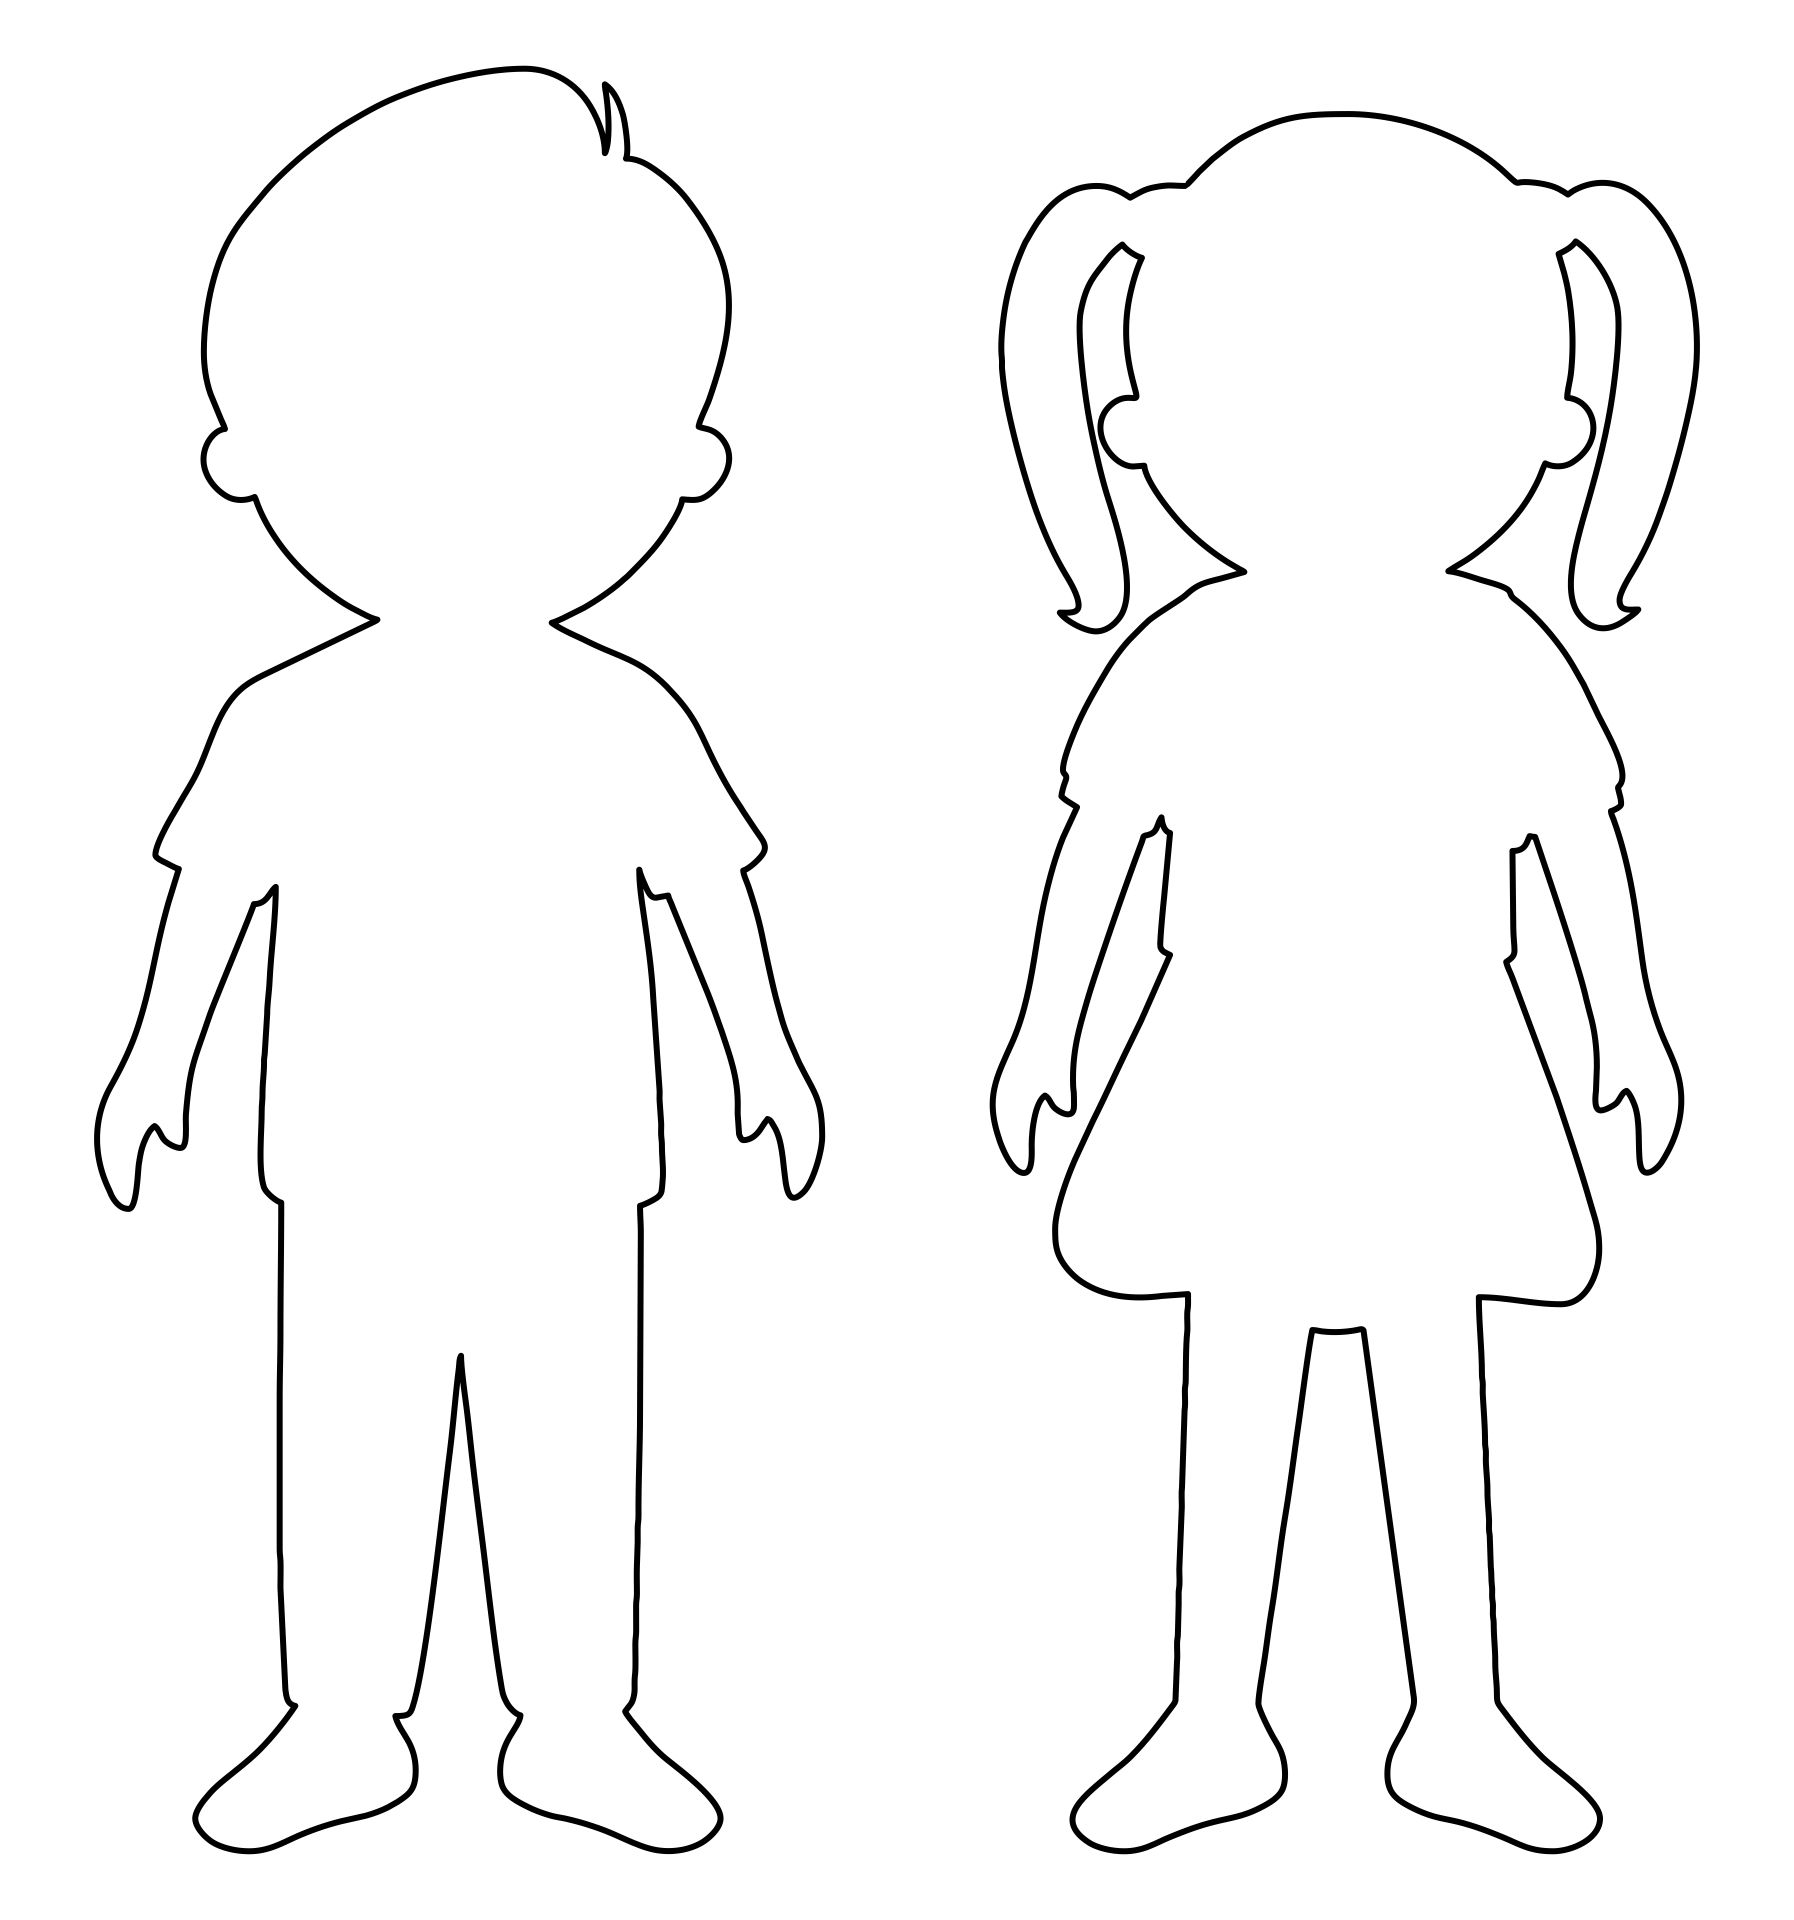 Printable Paper People Cutouts